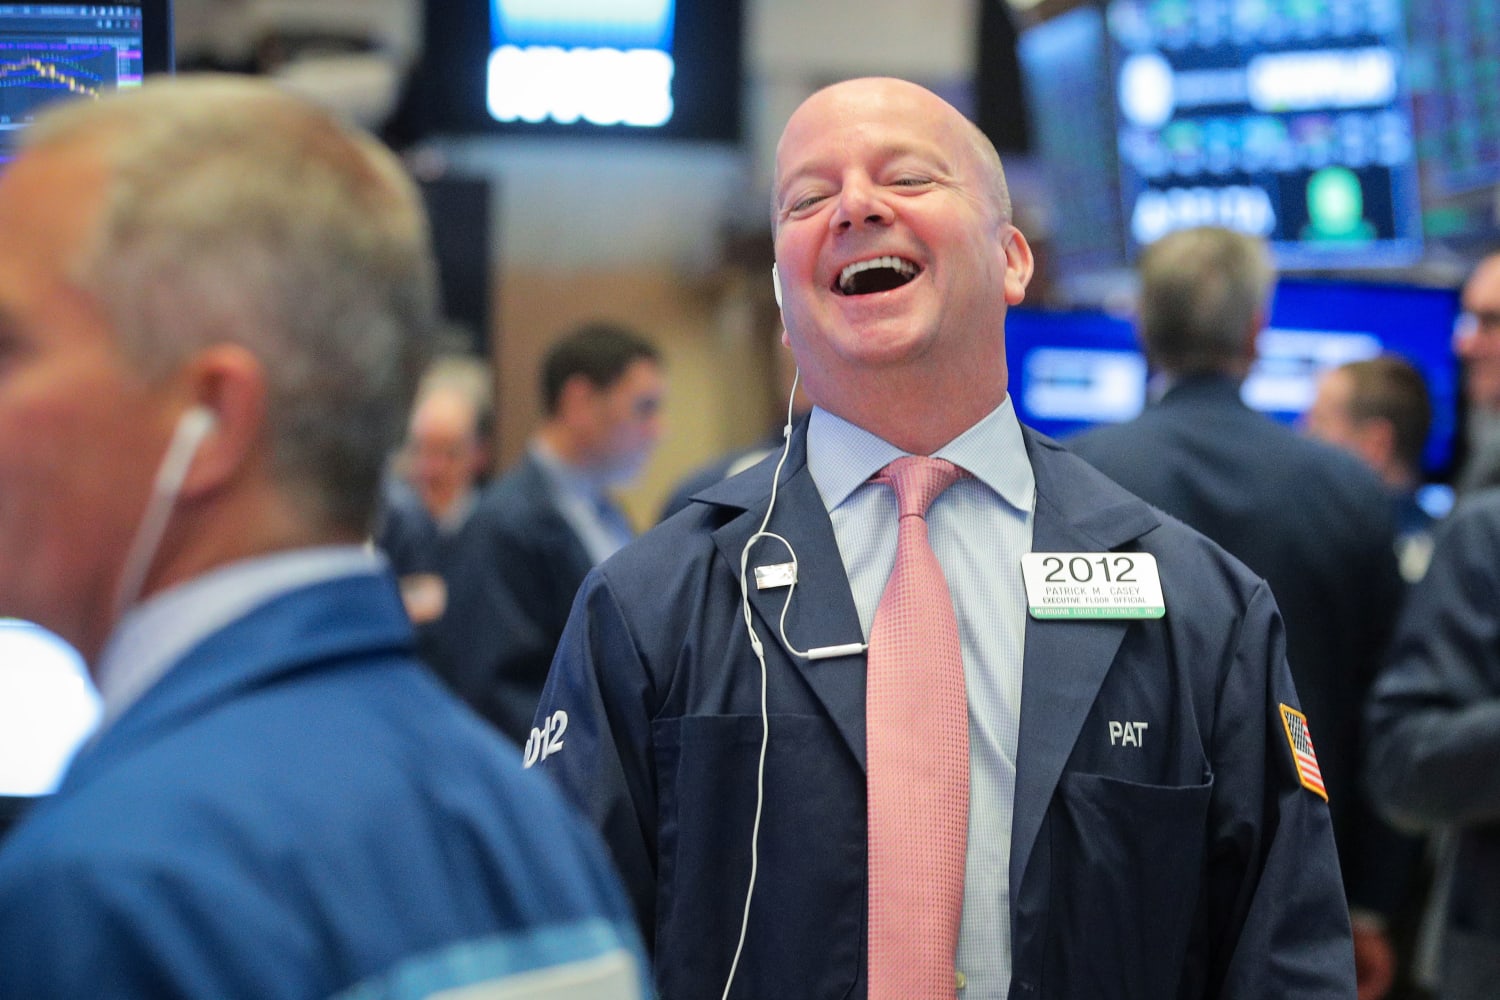 Here's what happened to the stock market on Monday